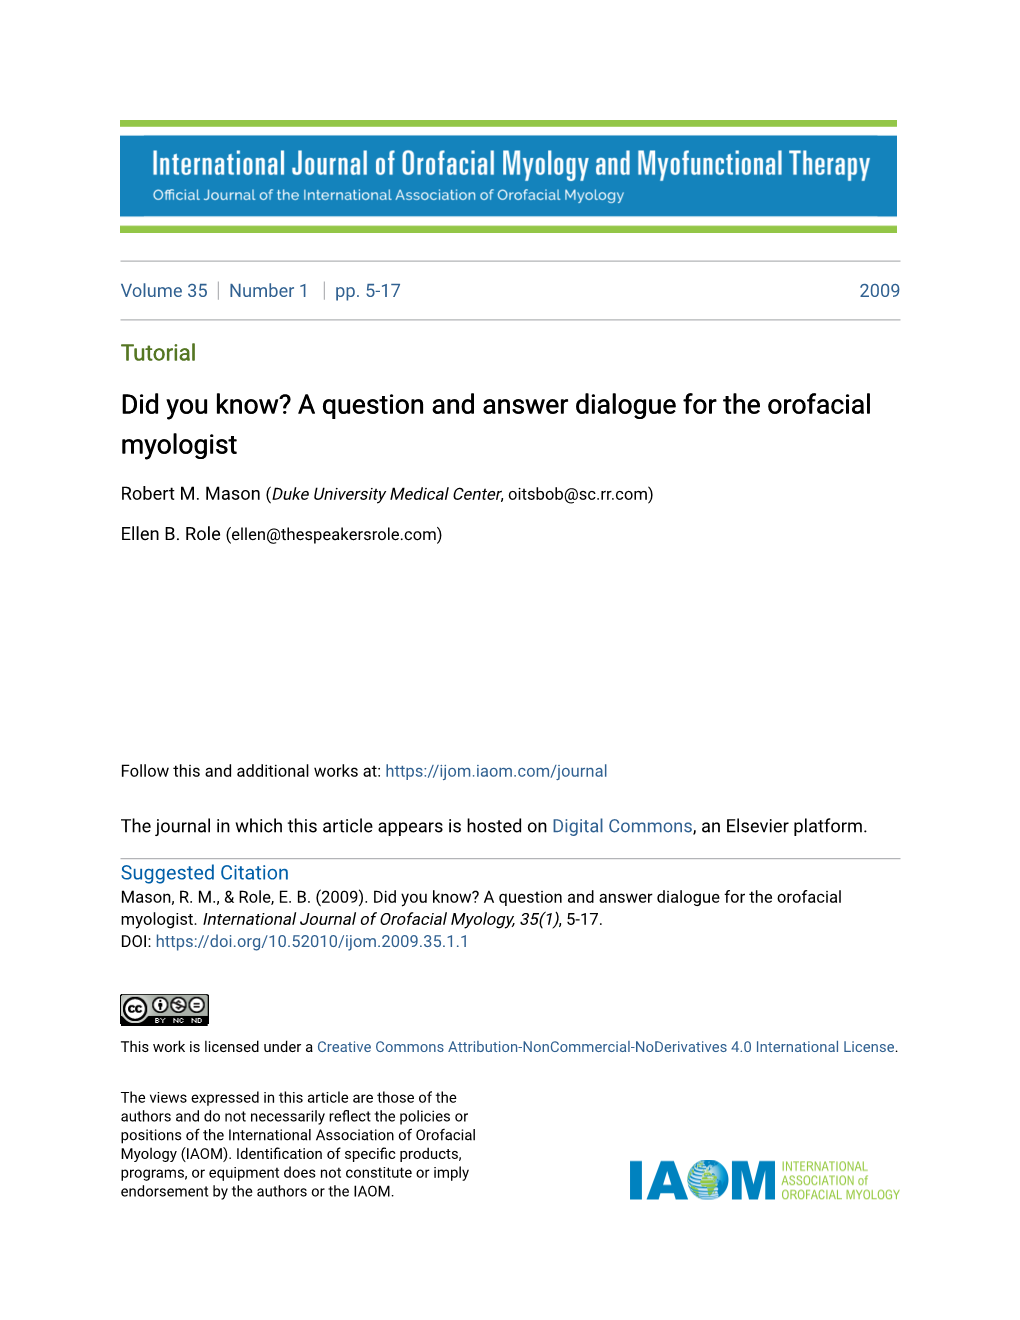 Did You Know? a Question and Answer Dialogue for the Orofacial Myologist